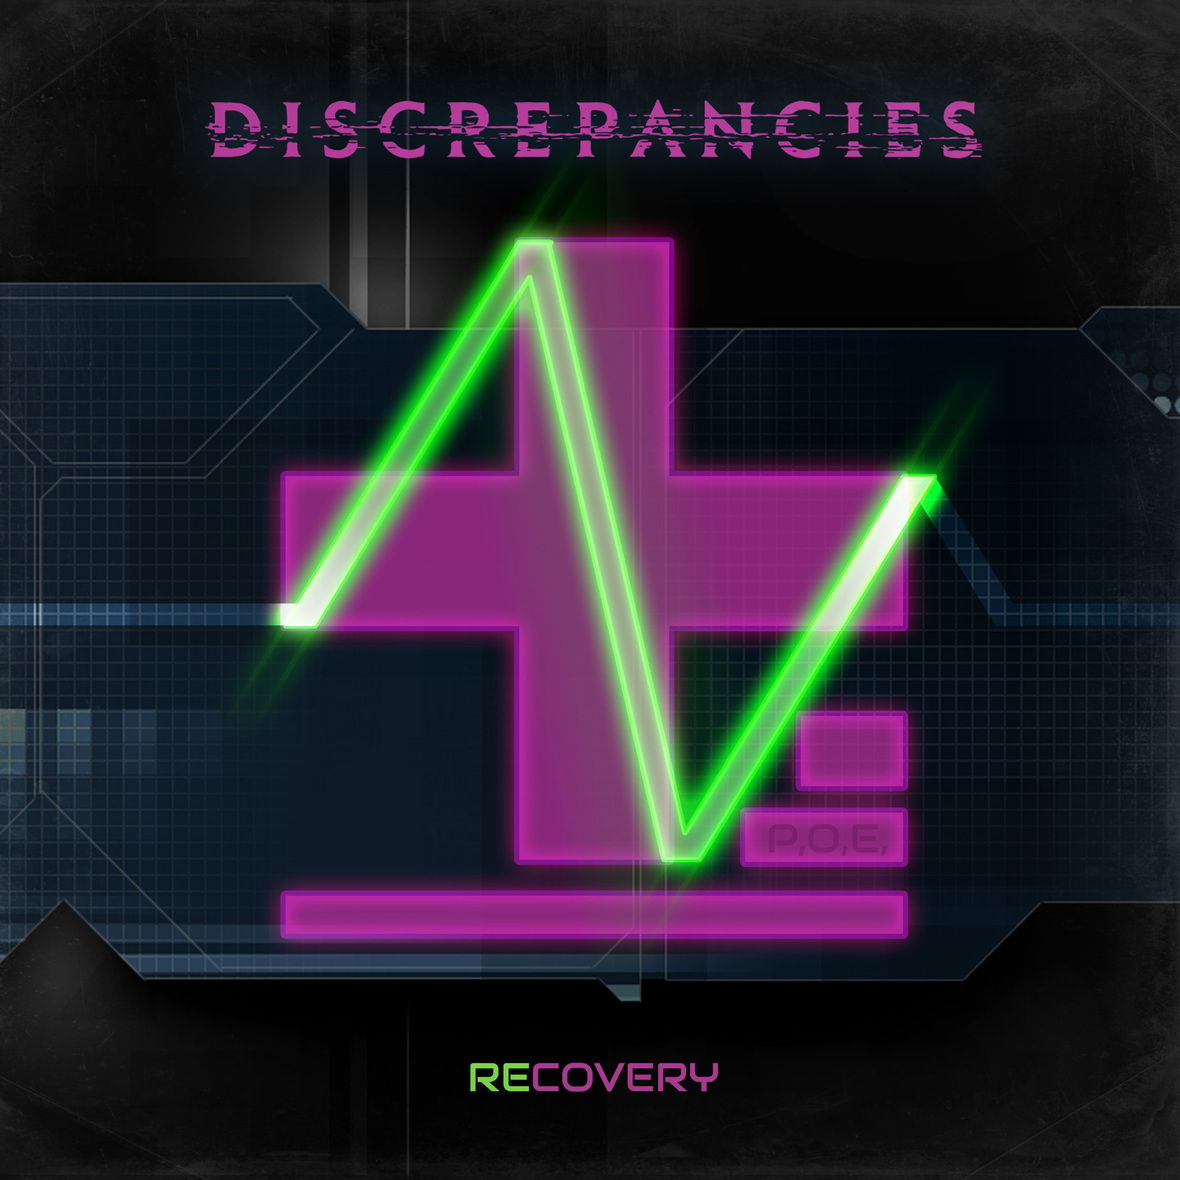 Artwork for the single “Recovery” by Discrepancies